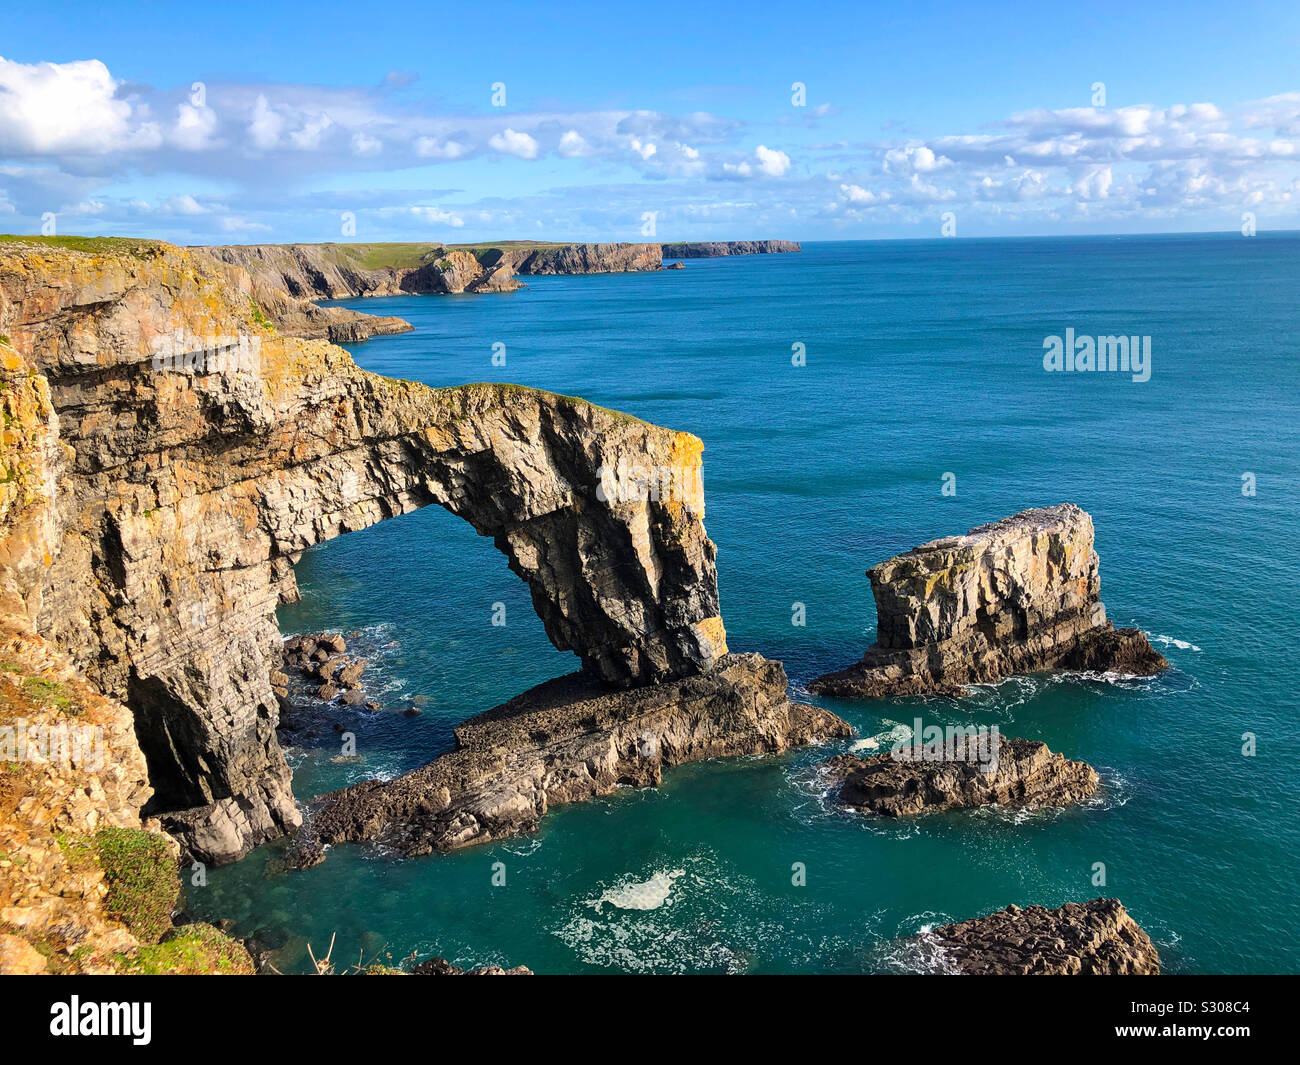 The Green Bridge of Wales natural arch in The Pembrokeshire Coast National Park at Merrion, Pembrokeshire in Wales, UK Stock Photo